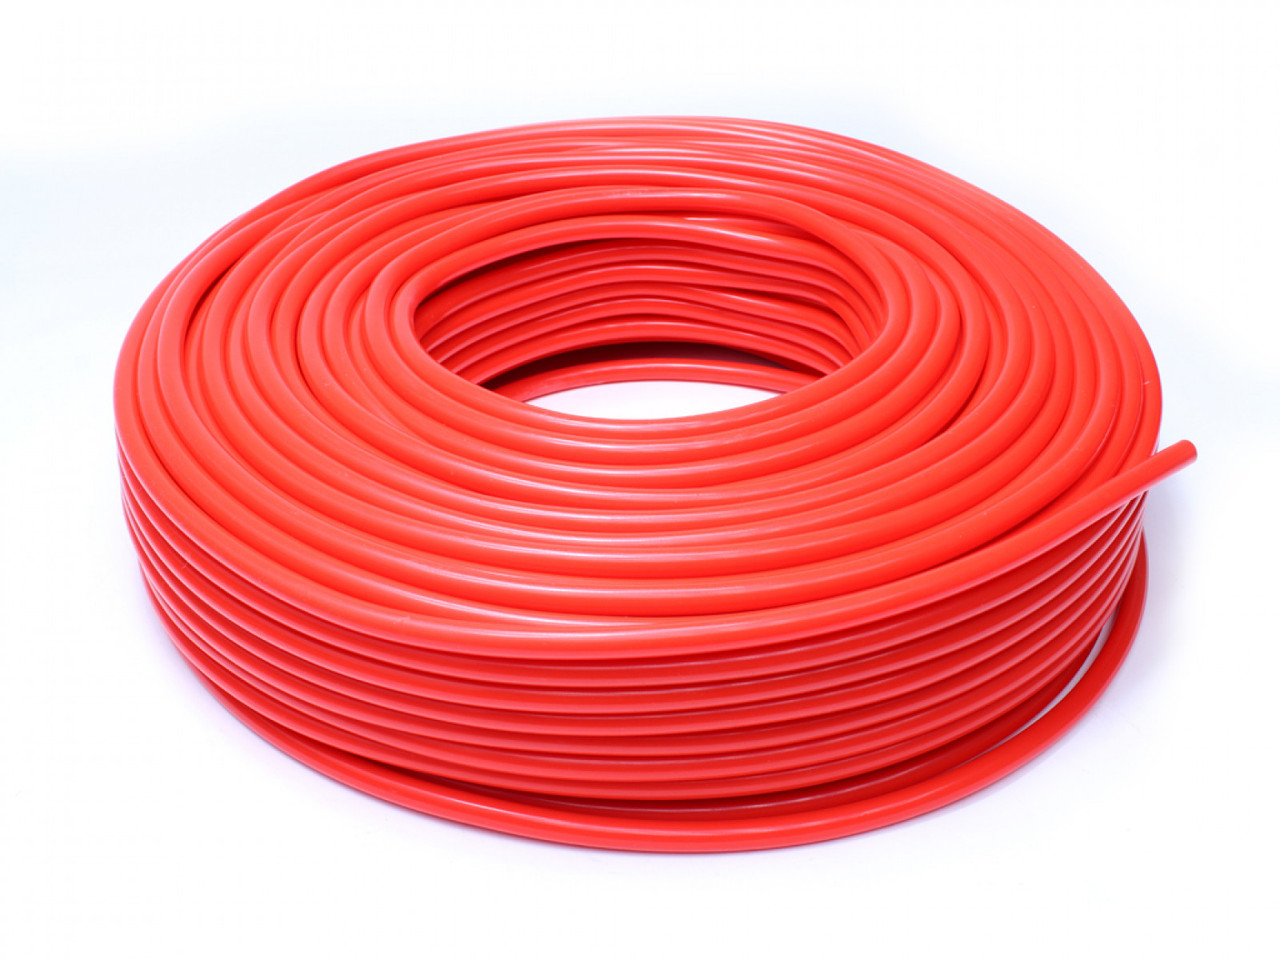 HPS 1/8" (3mm) ID Red High Temp Silicone Vacuum Hose w/ 1.5mm Wall Thickness - 50 Feet Pack (HPS-HTSVH3TW-REDx50)